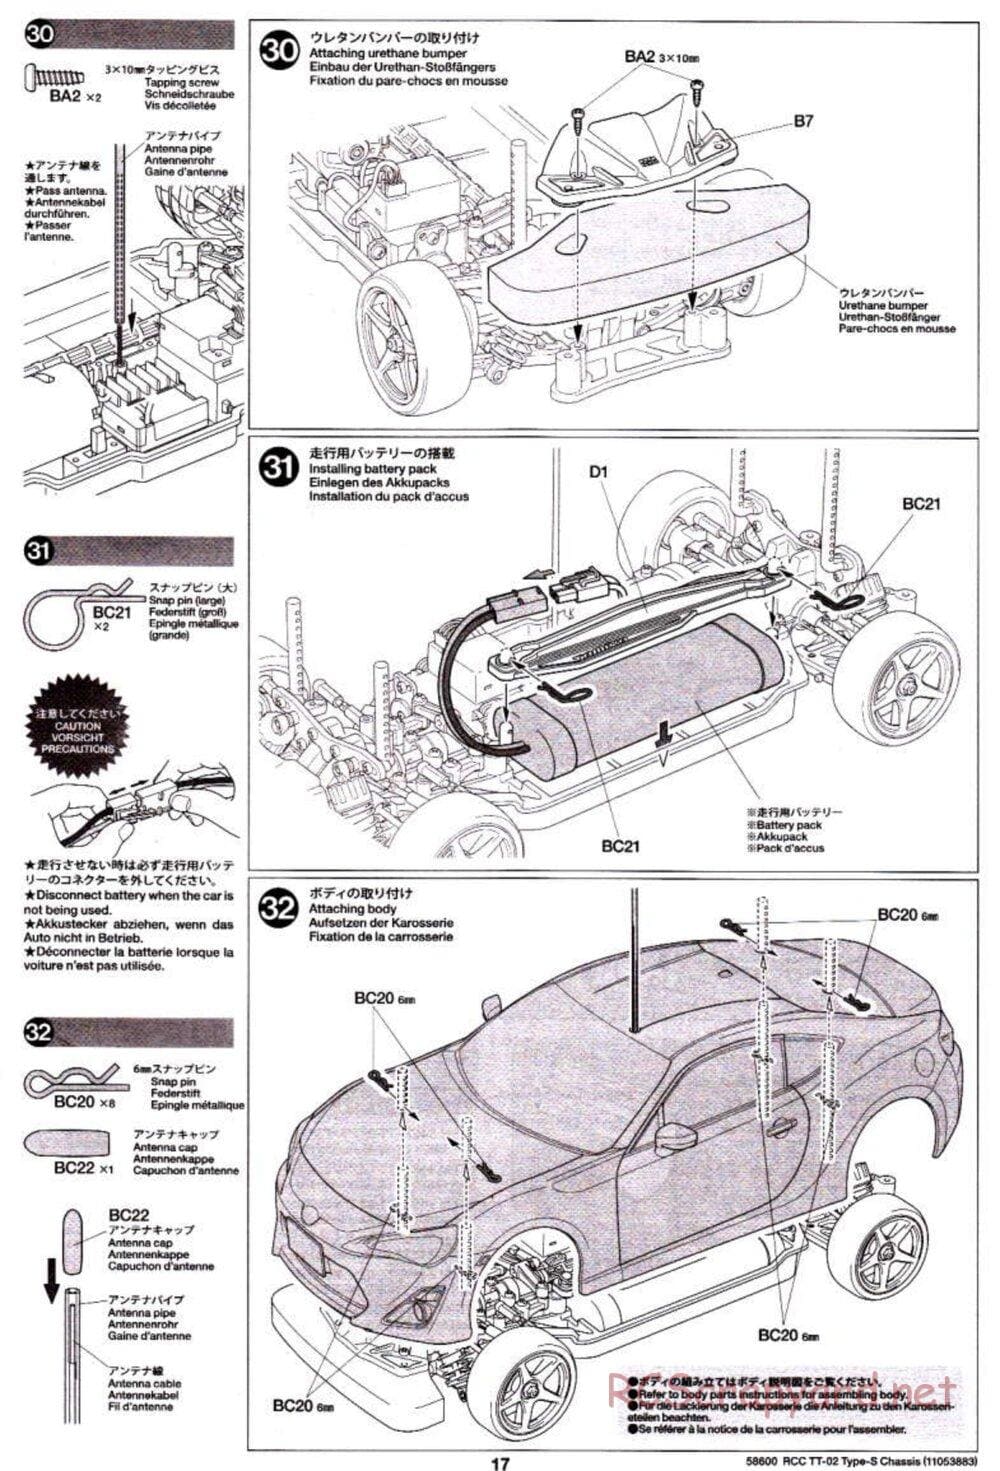 Tamiya - TT-02 Type-S Chassis - Manual - Page 17